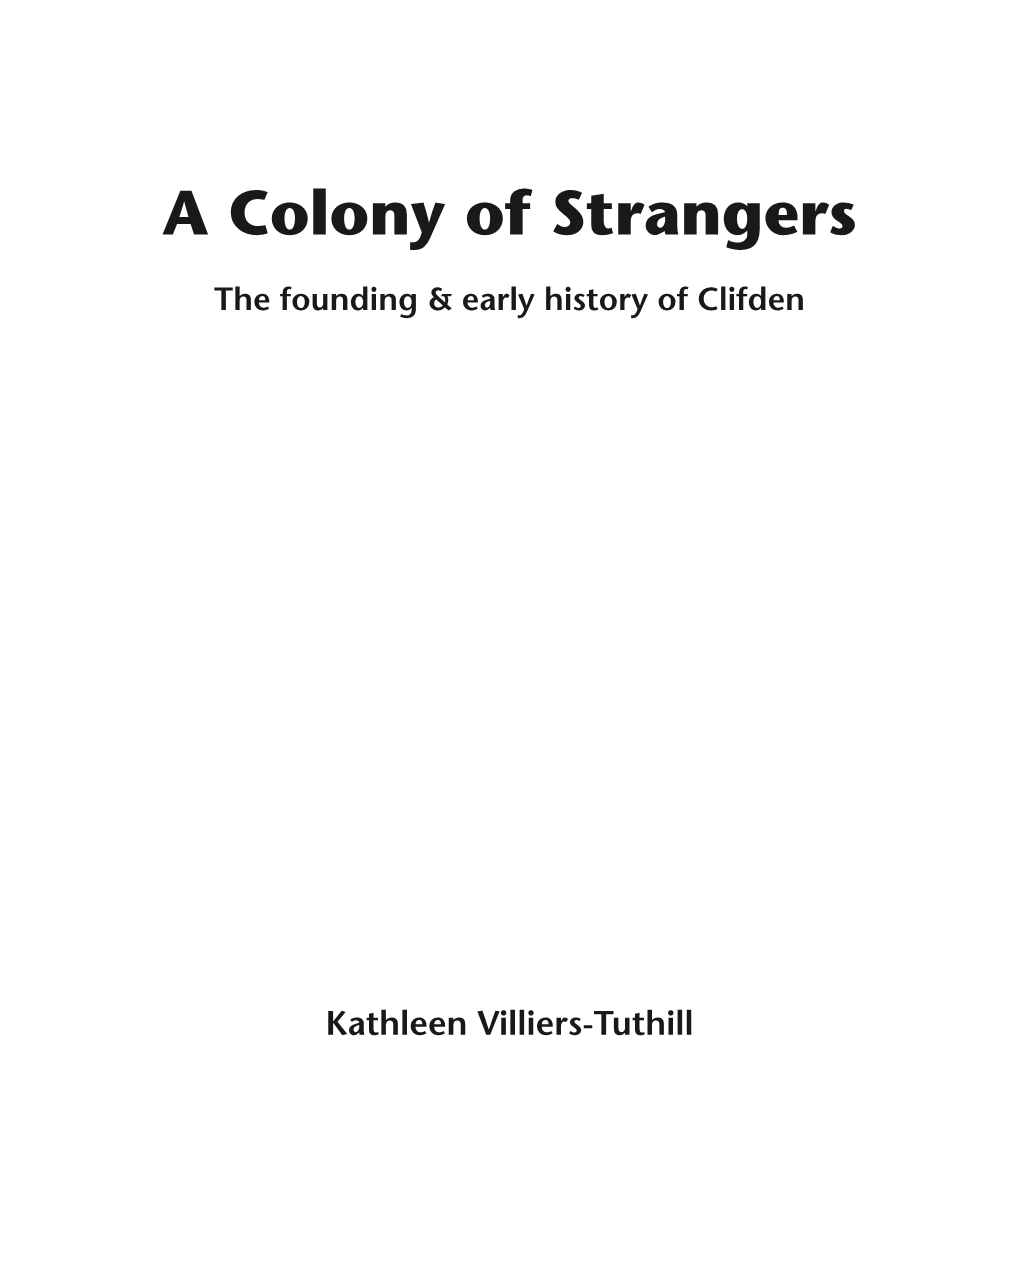 A Colony of Strangers